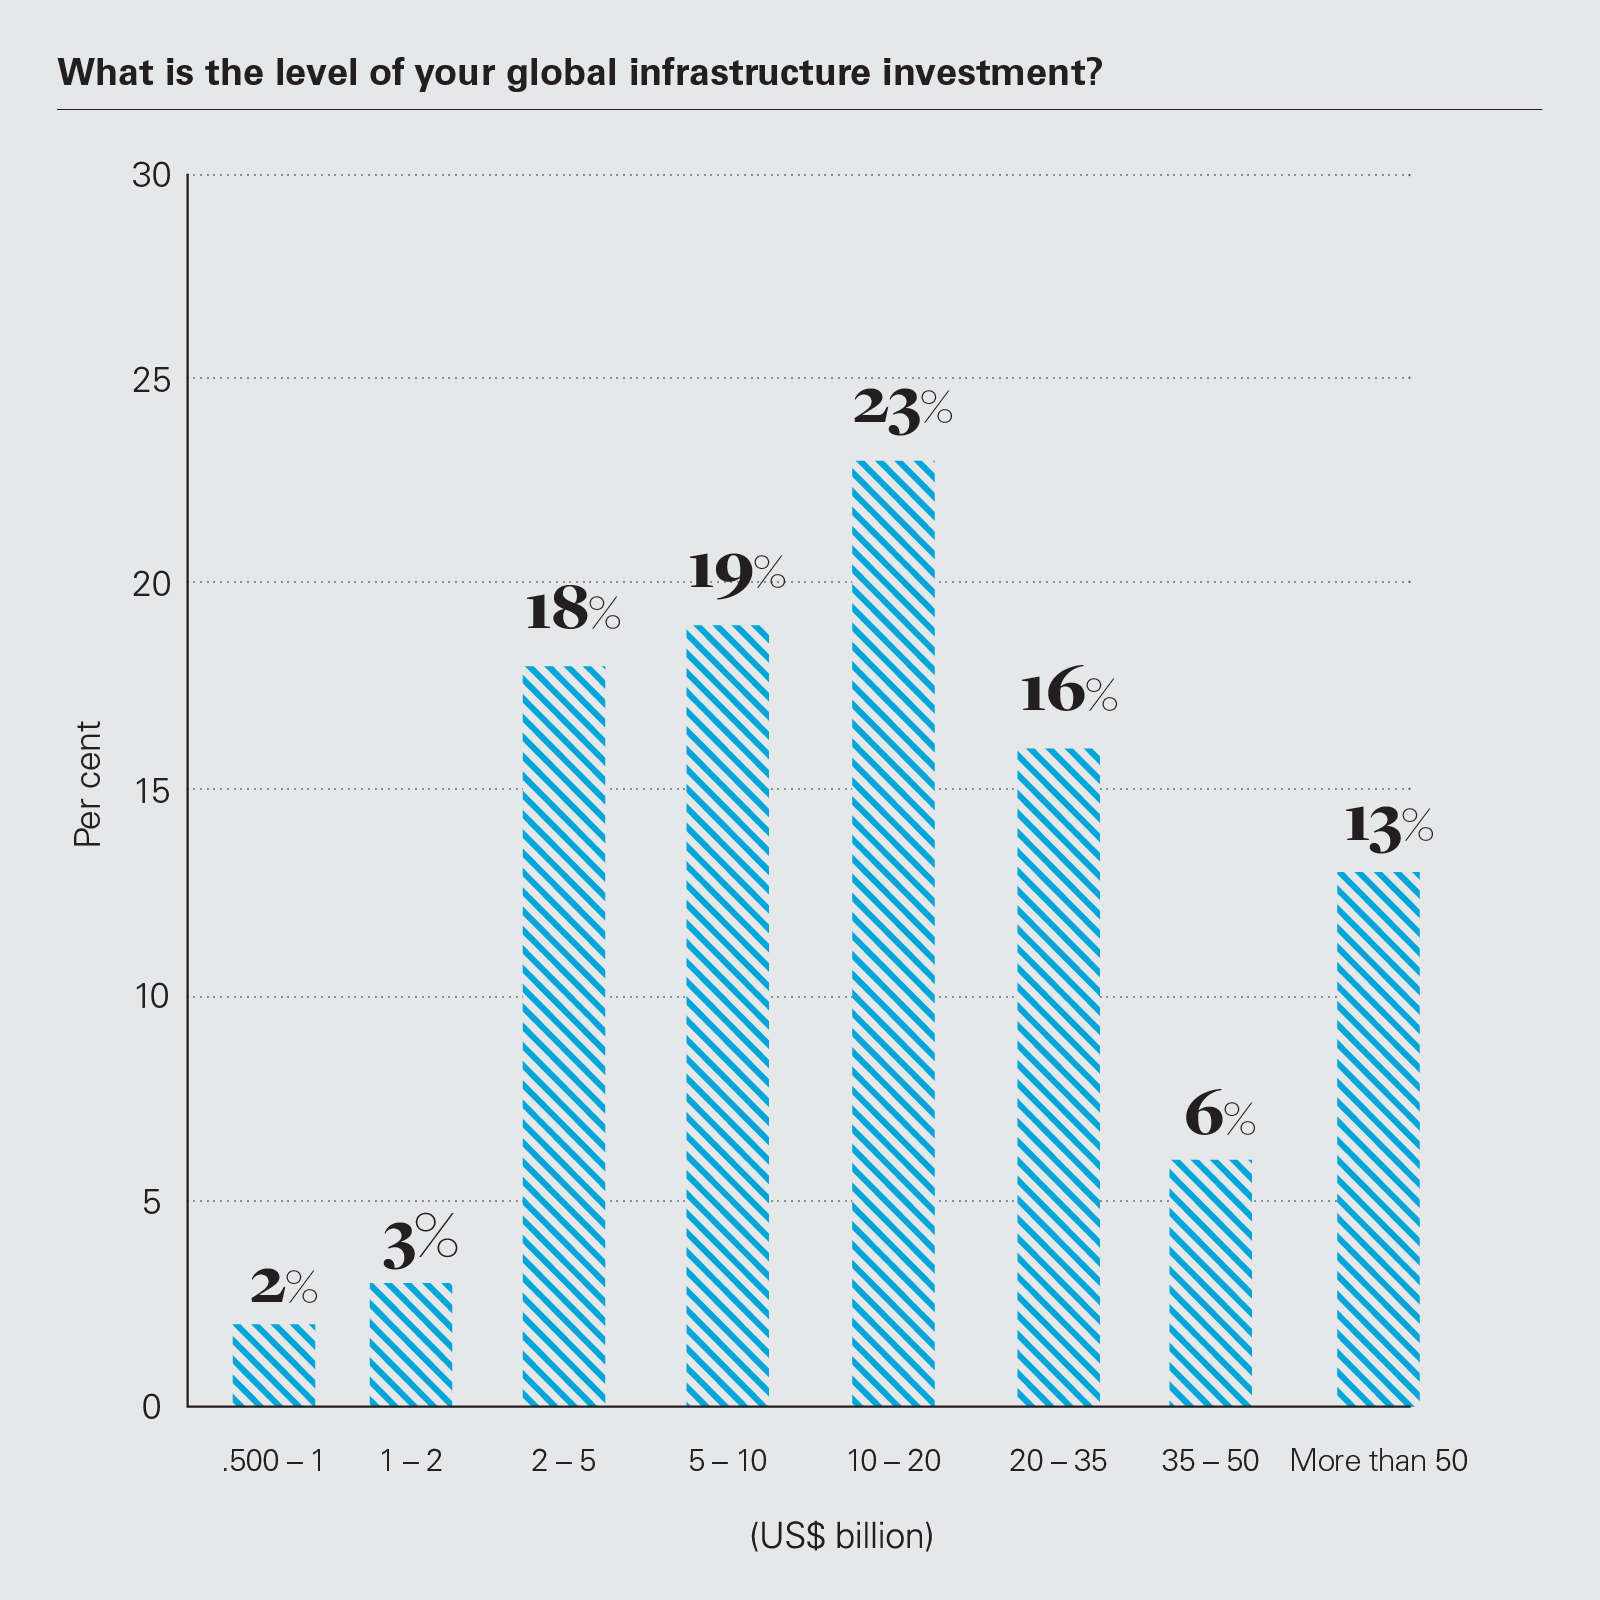 What is the level of your global infrastructureinvestment?